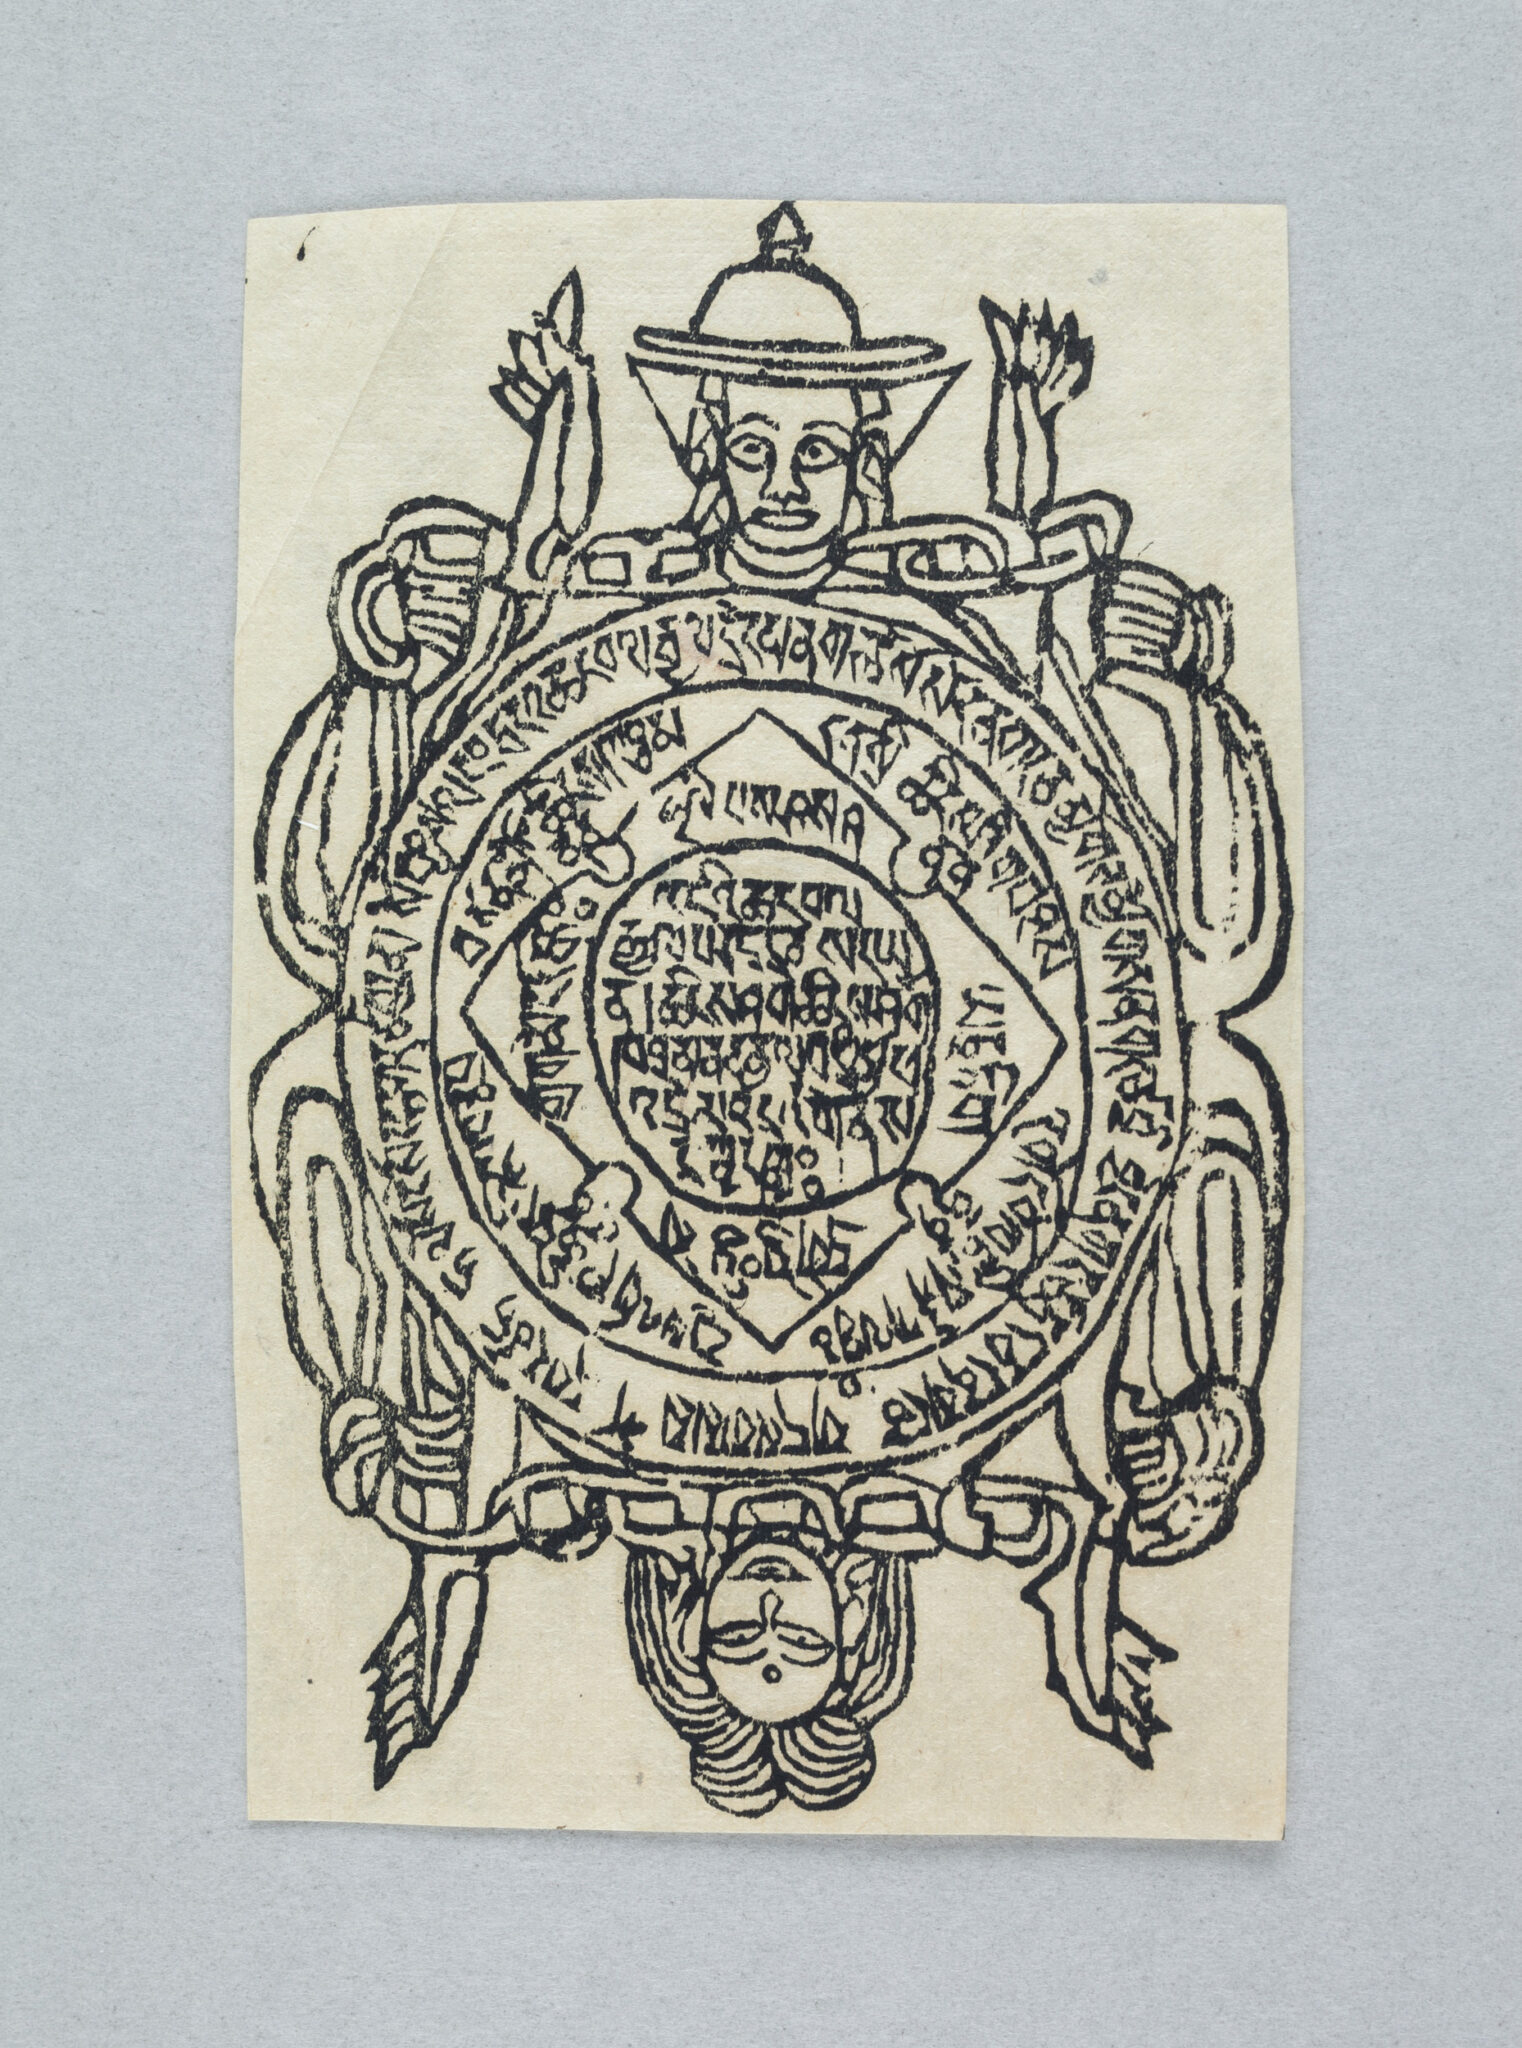 Line drawing in ink depicting central circle inscribed with text framed by two figures; One upside down, one right-side up